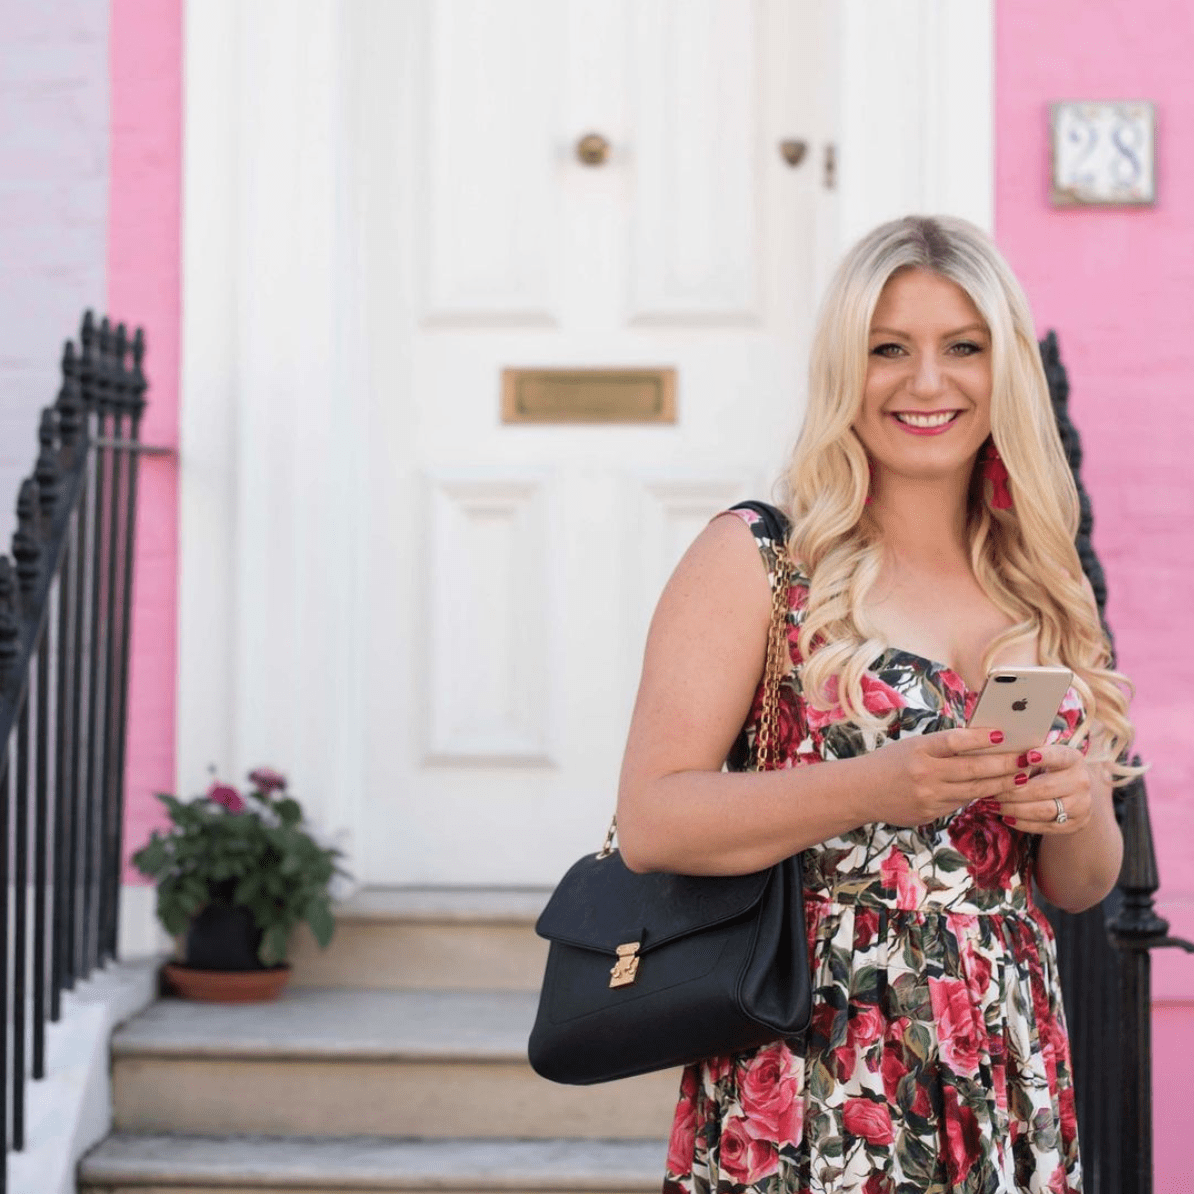 Emily Williams smiling holding her phone and wearing a floral dress